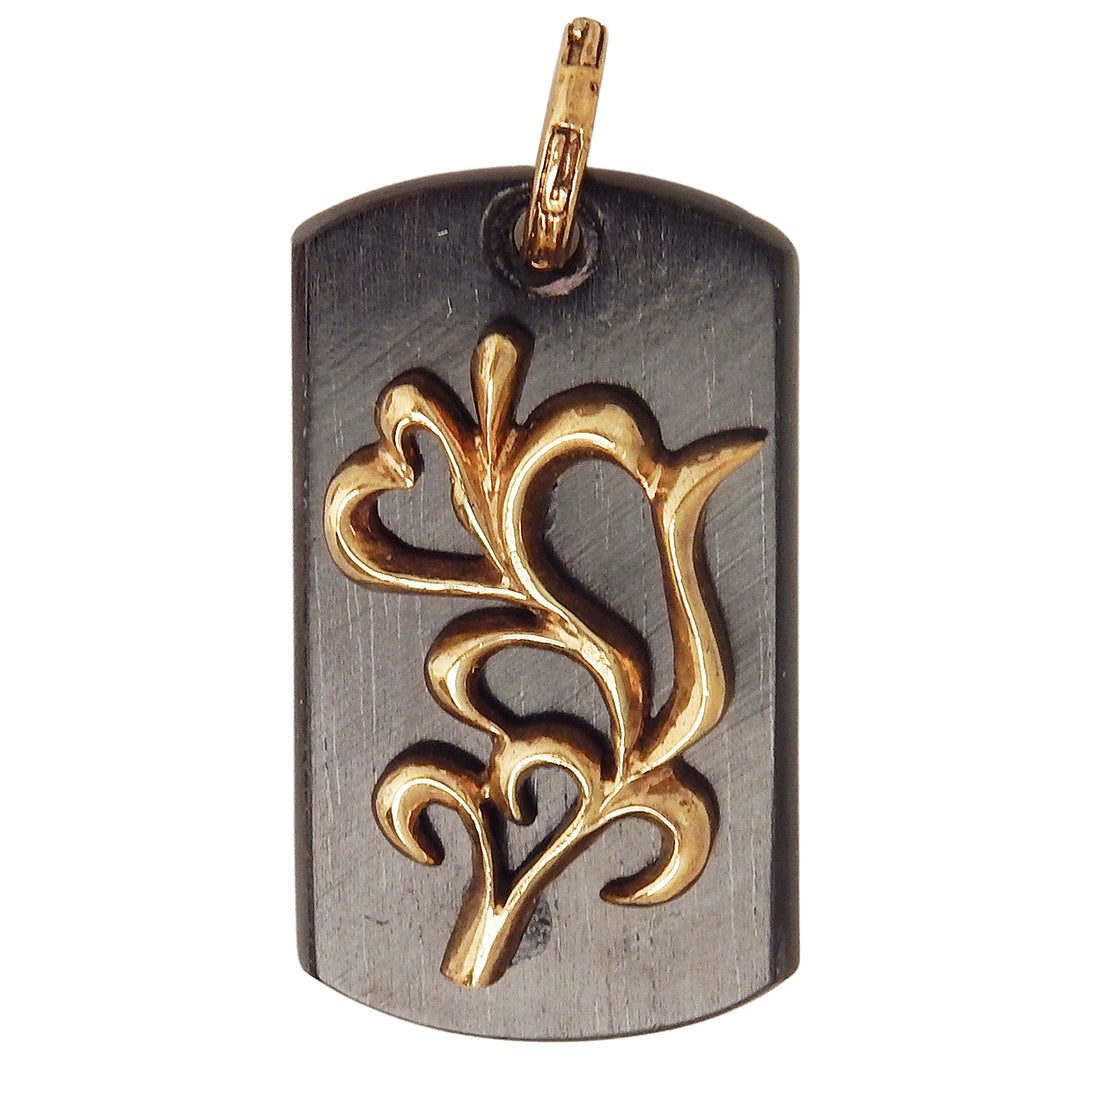 MARCOS - "IVY HEART" Pendant in Ebony Wood and Gold Plated Silver